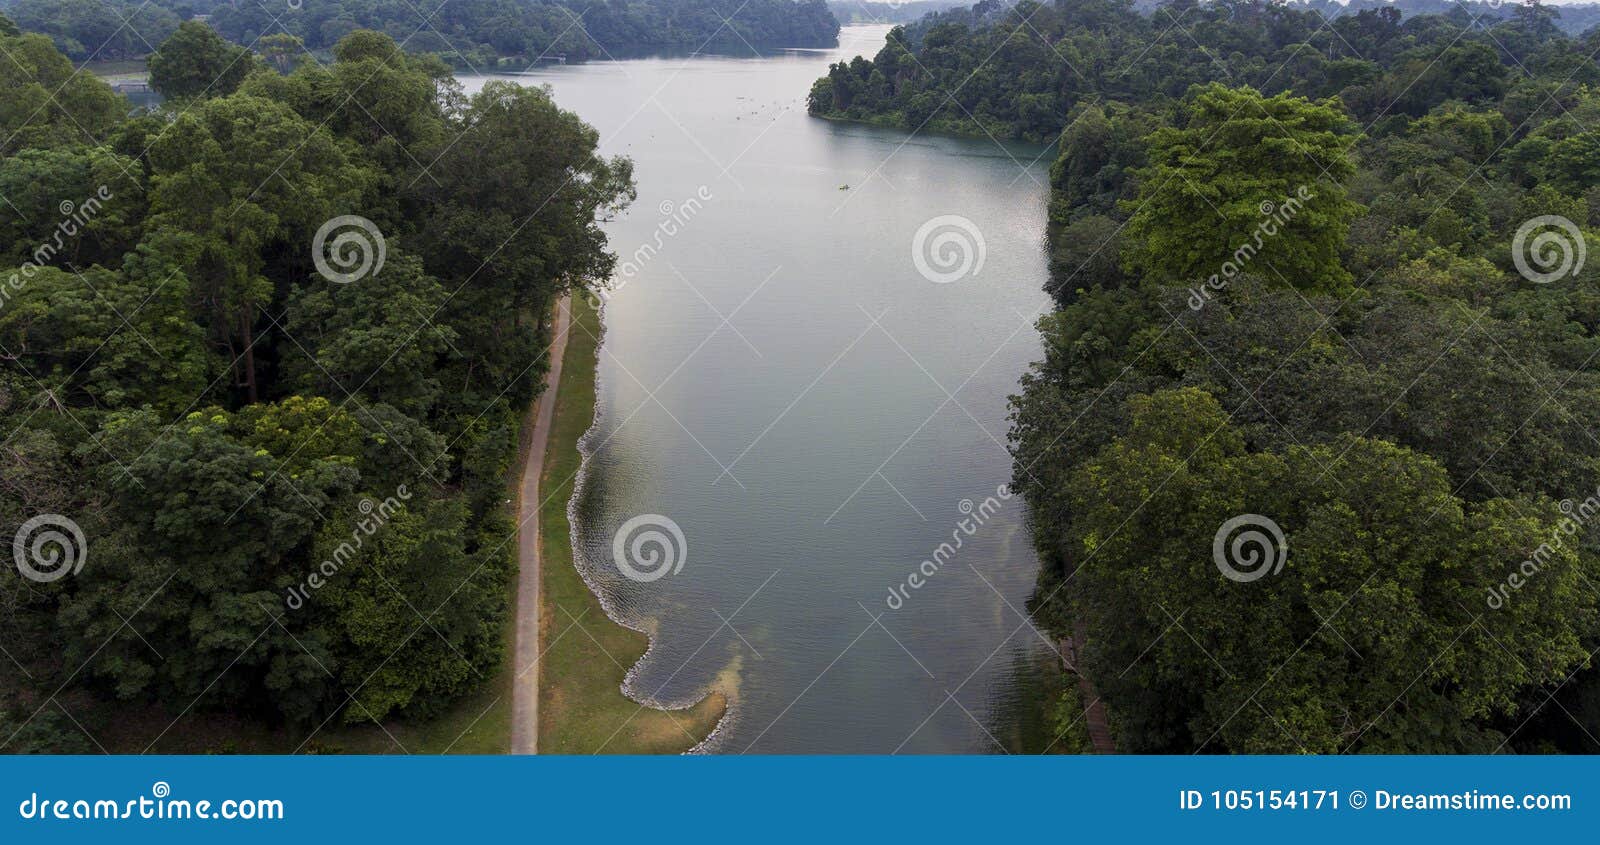 Amazing Lake Seen From Above Stock Image Image Of Summer